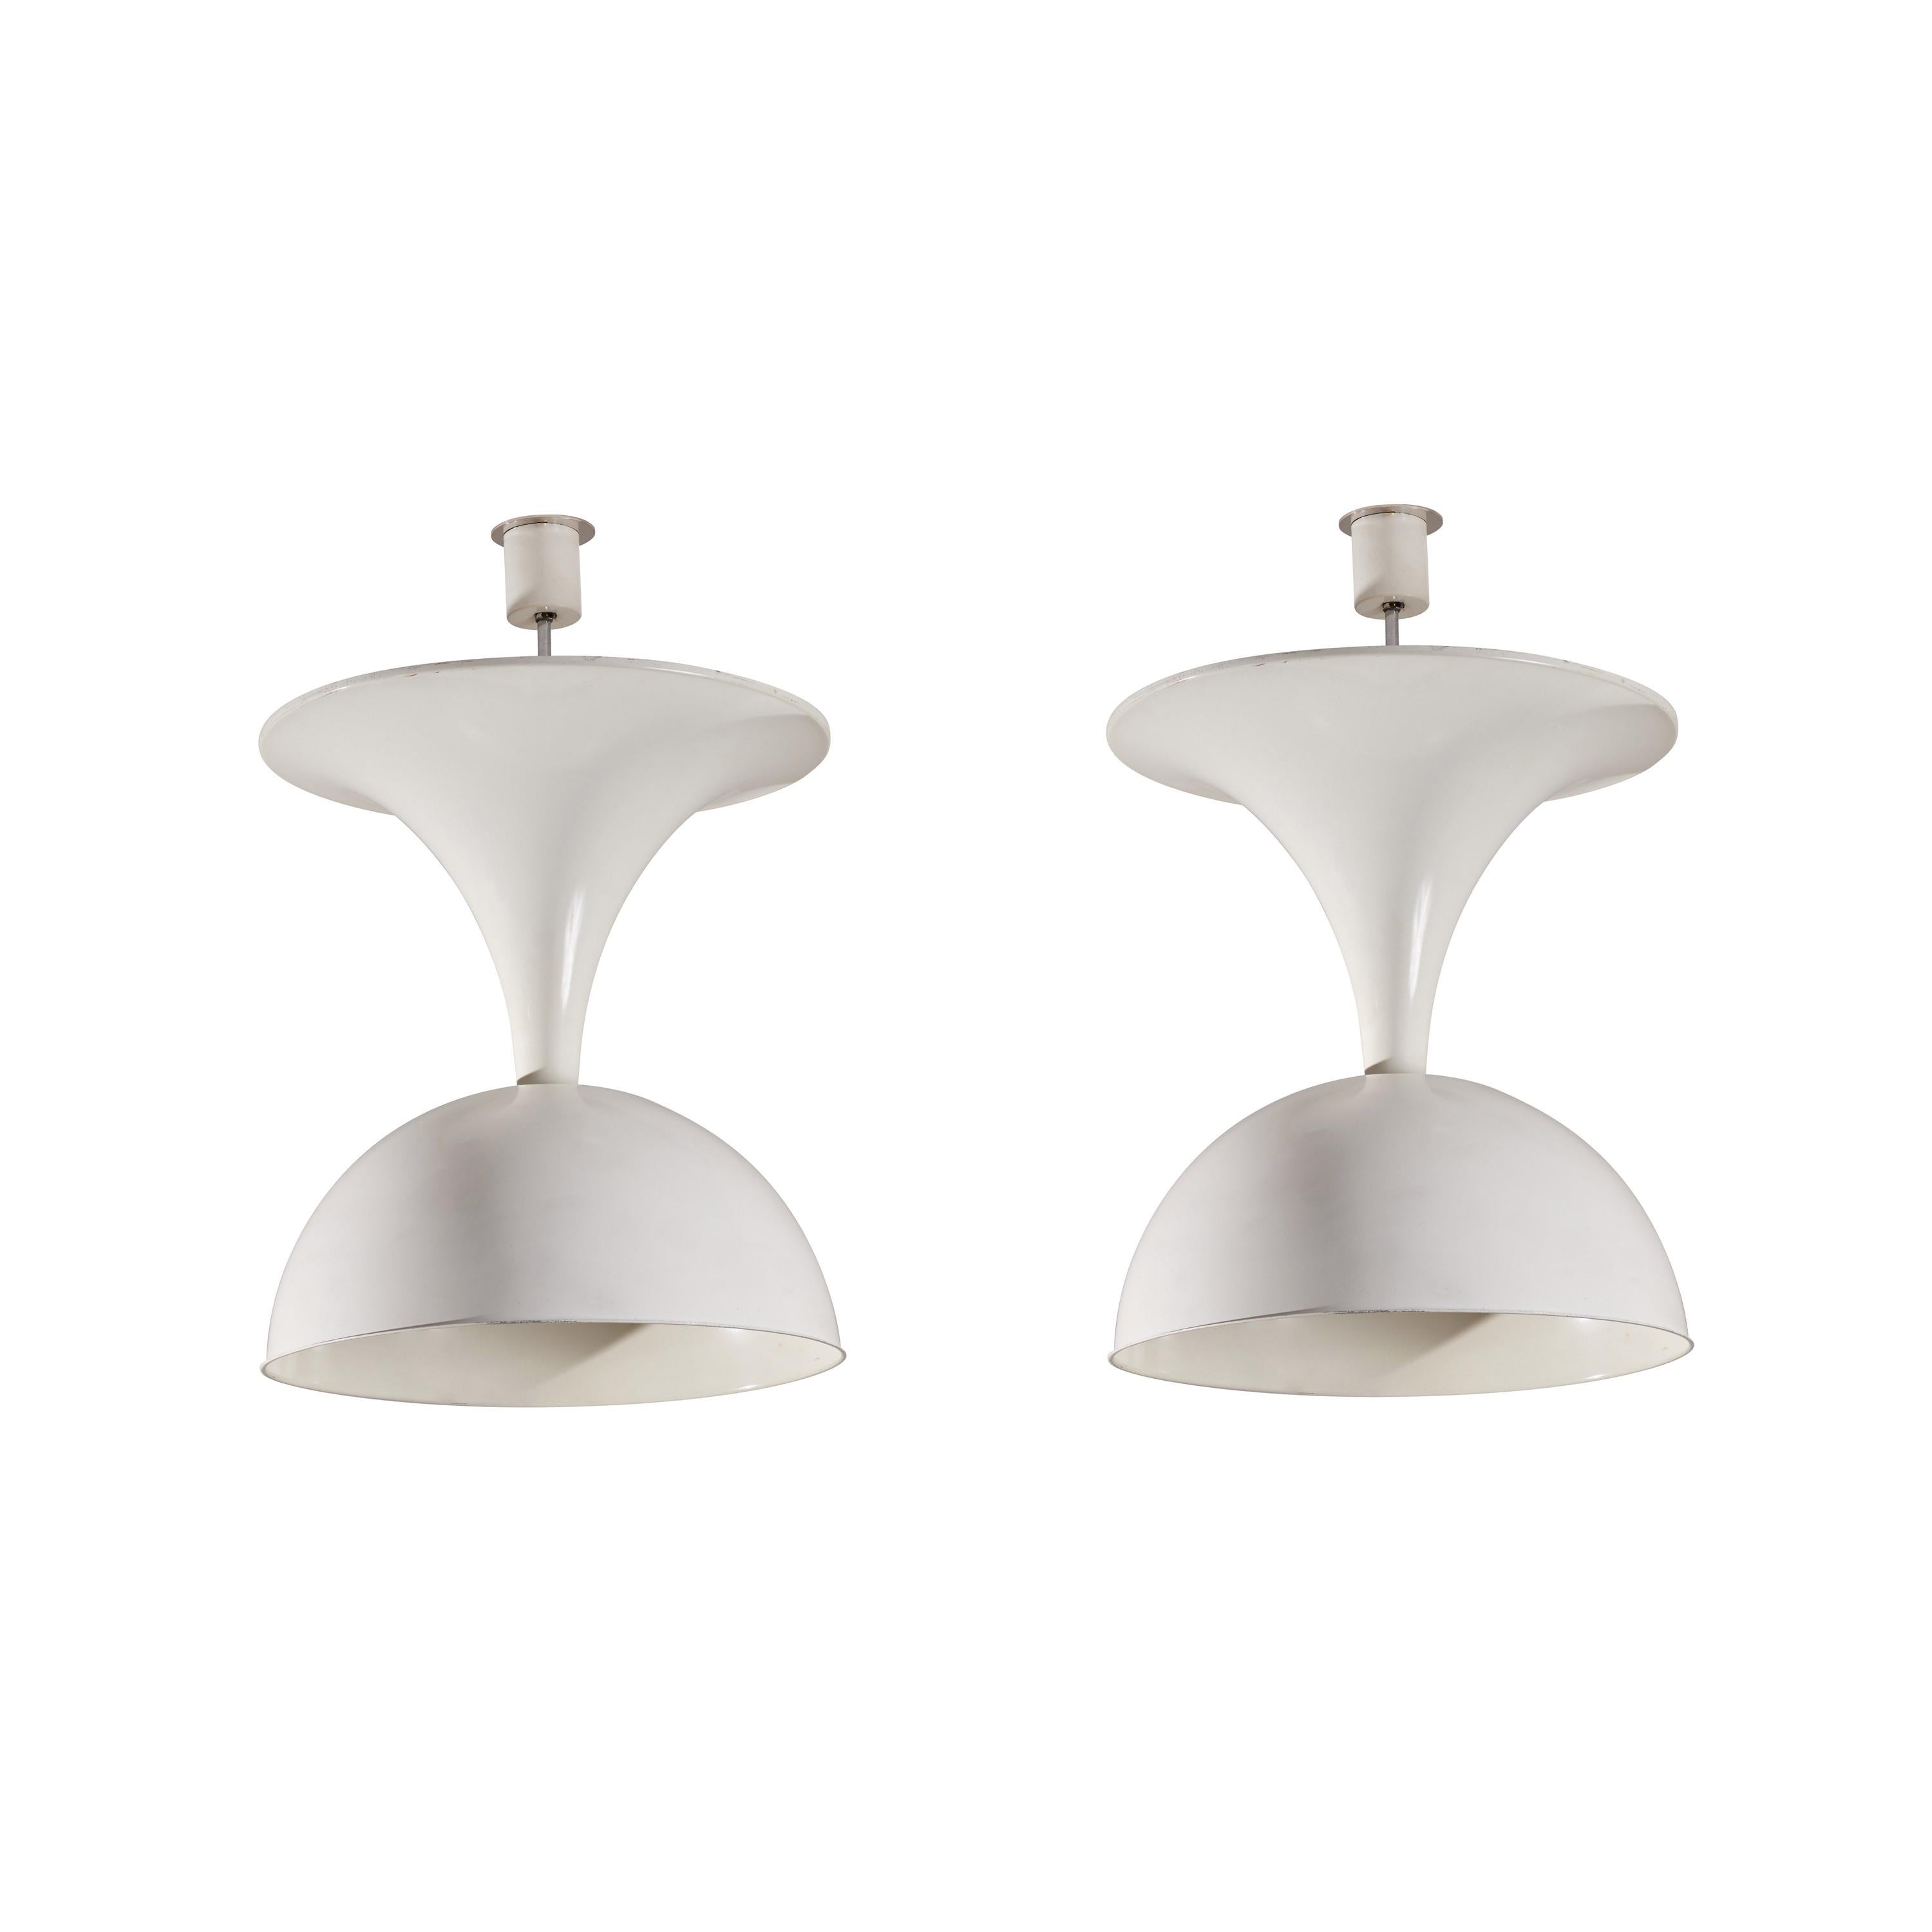 Two Ceiling Lights by Valenti